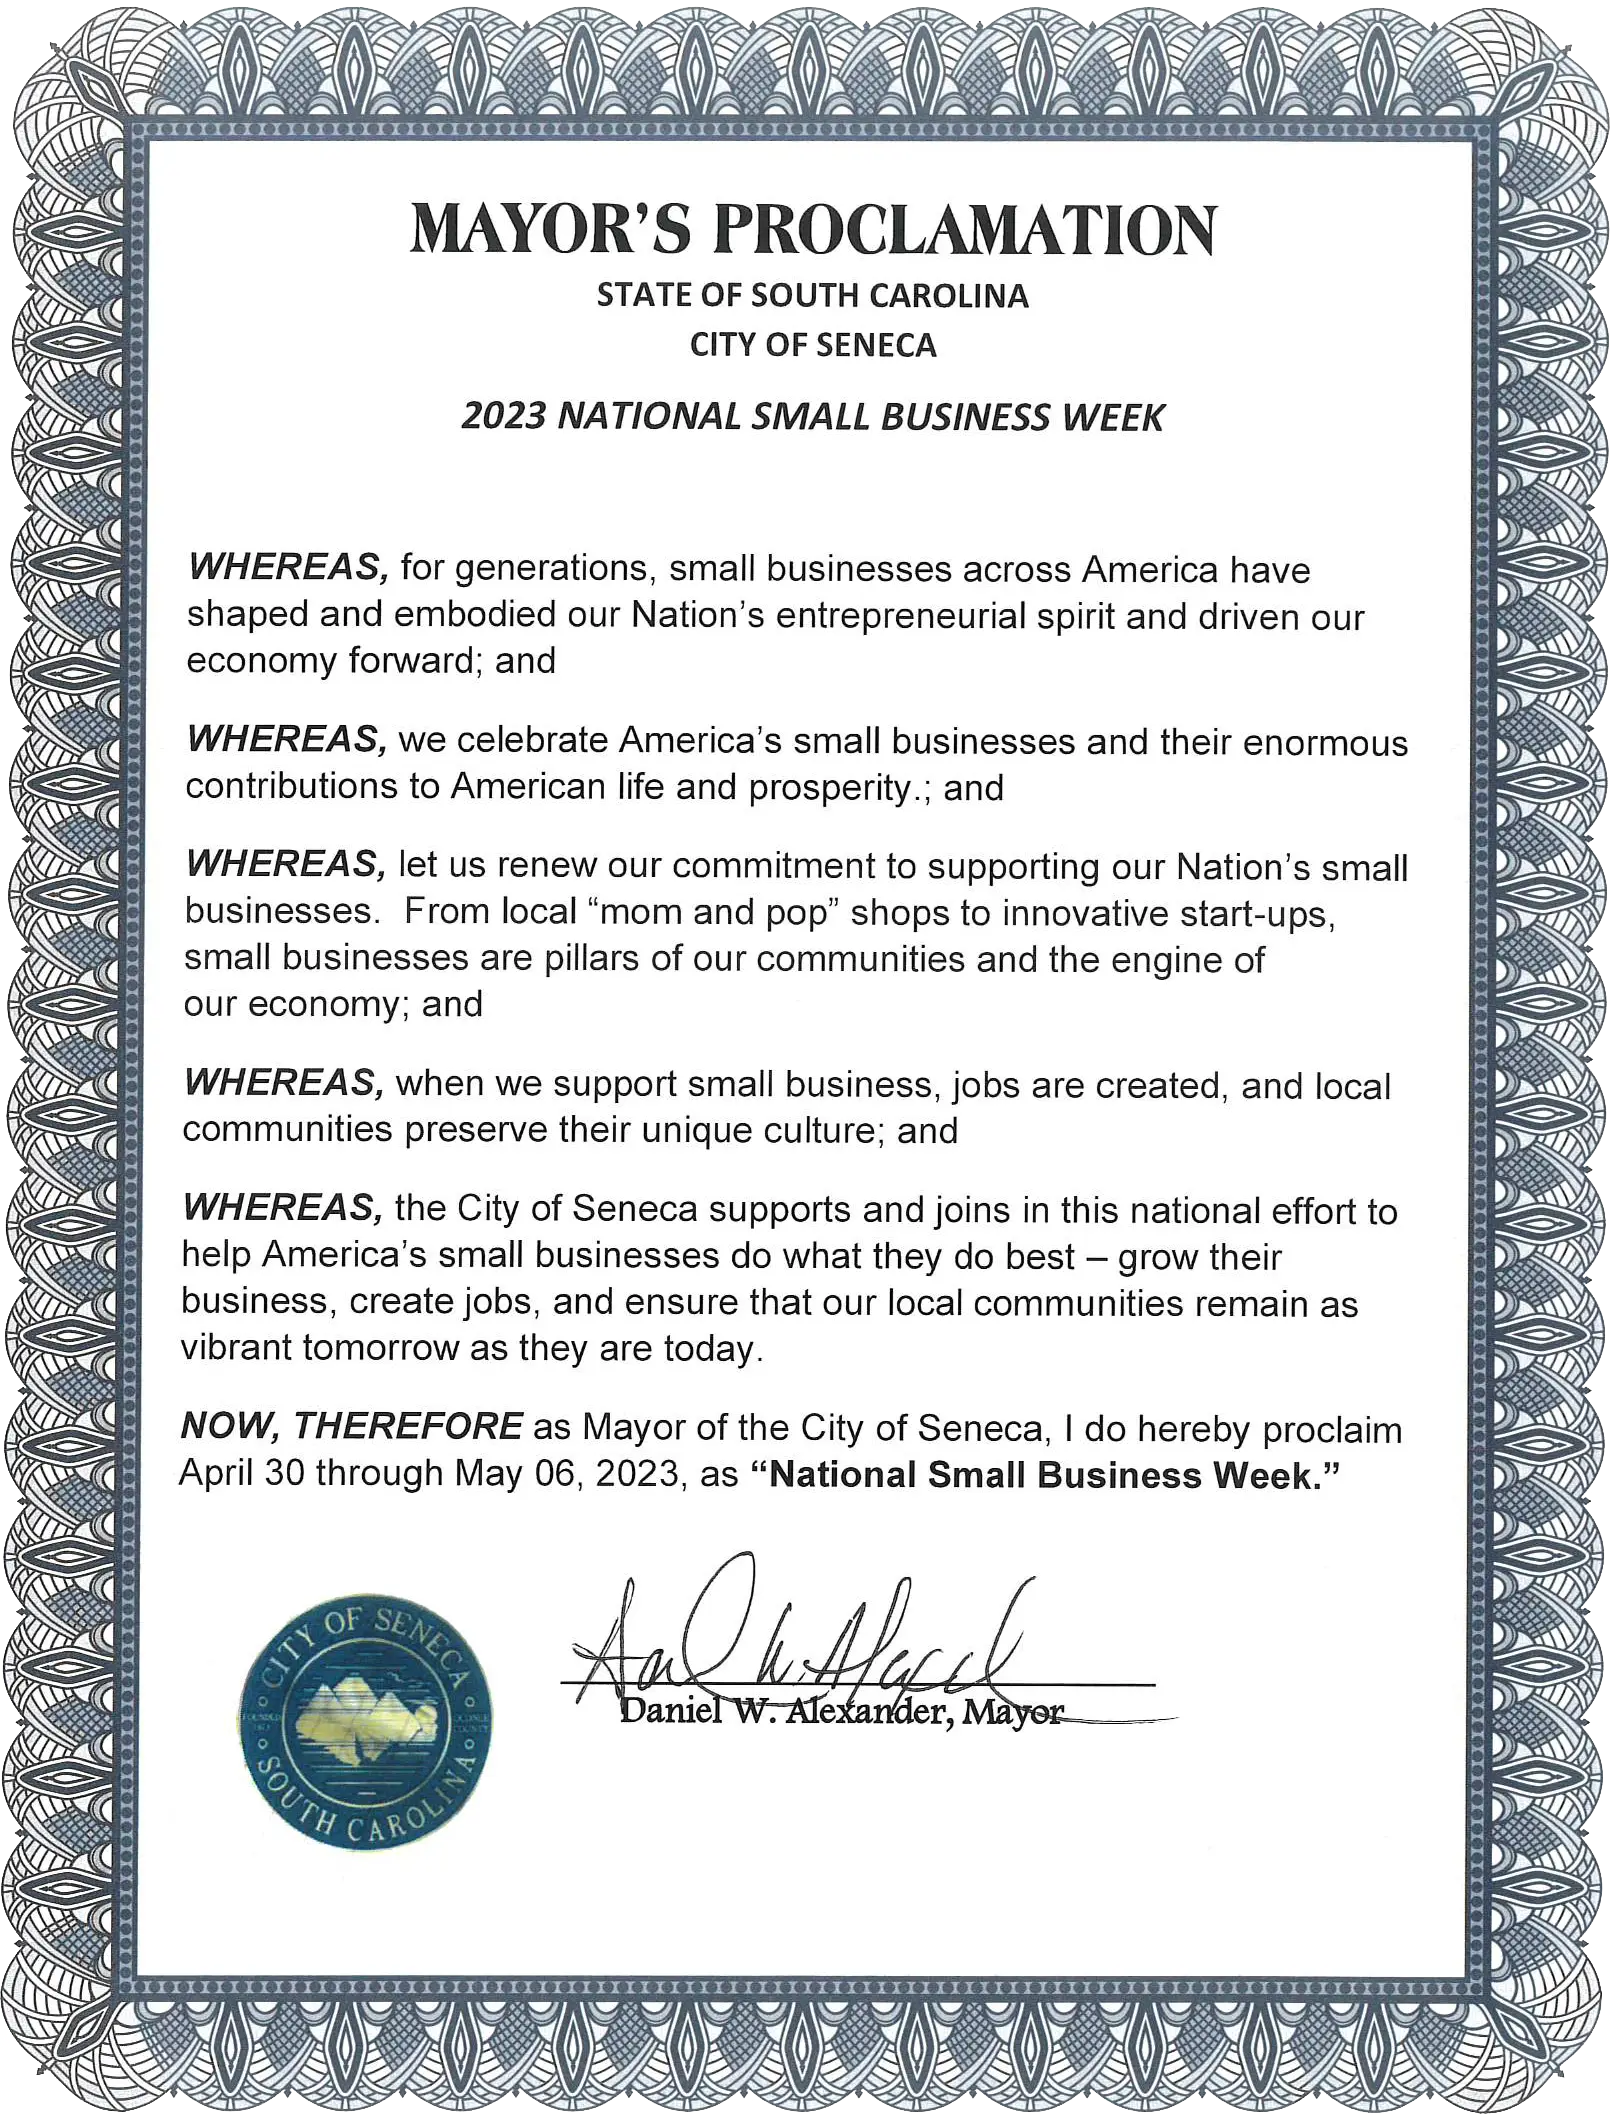 mayor-s-proclamation-national-small-business-week-2023